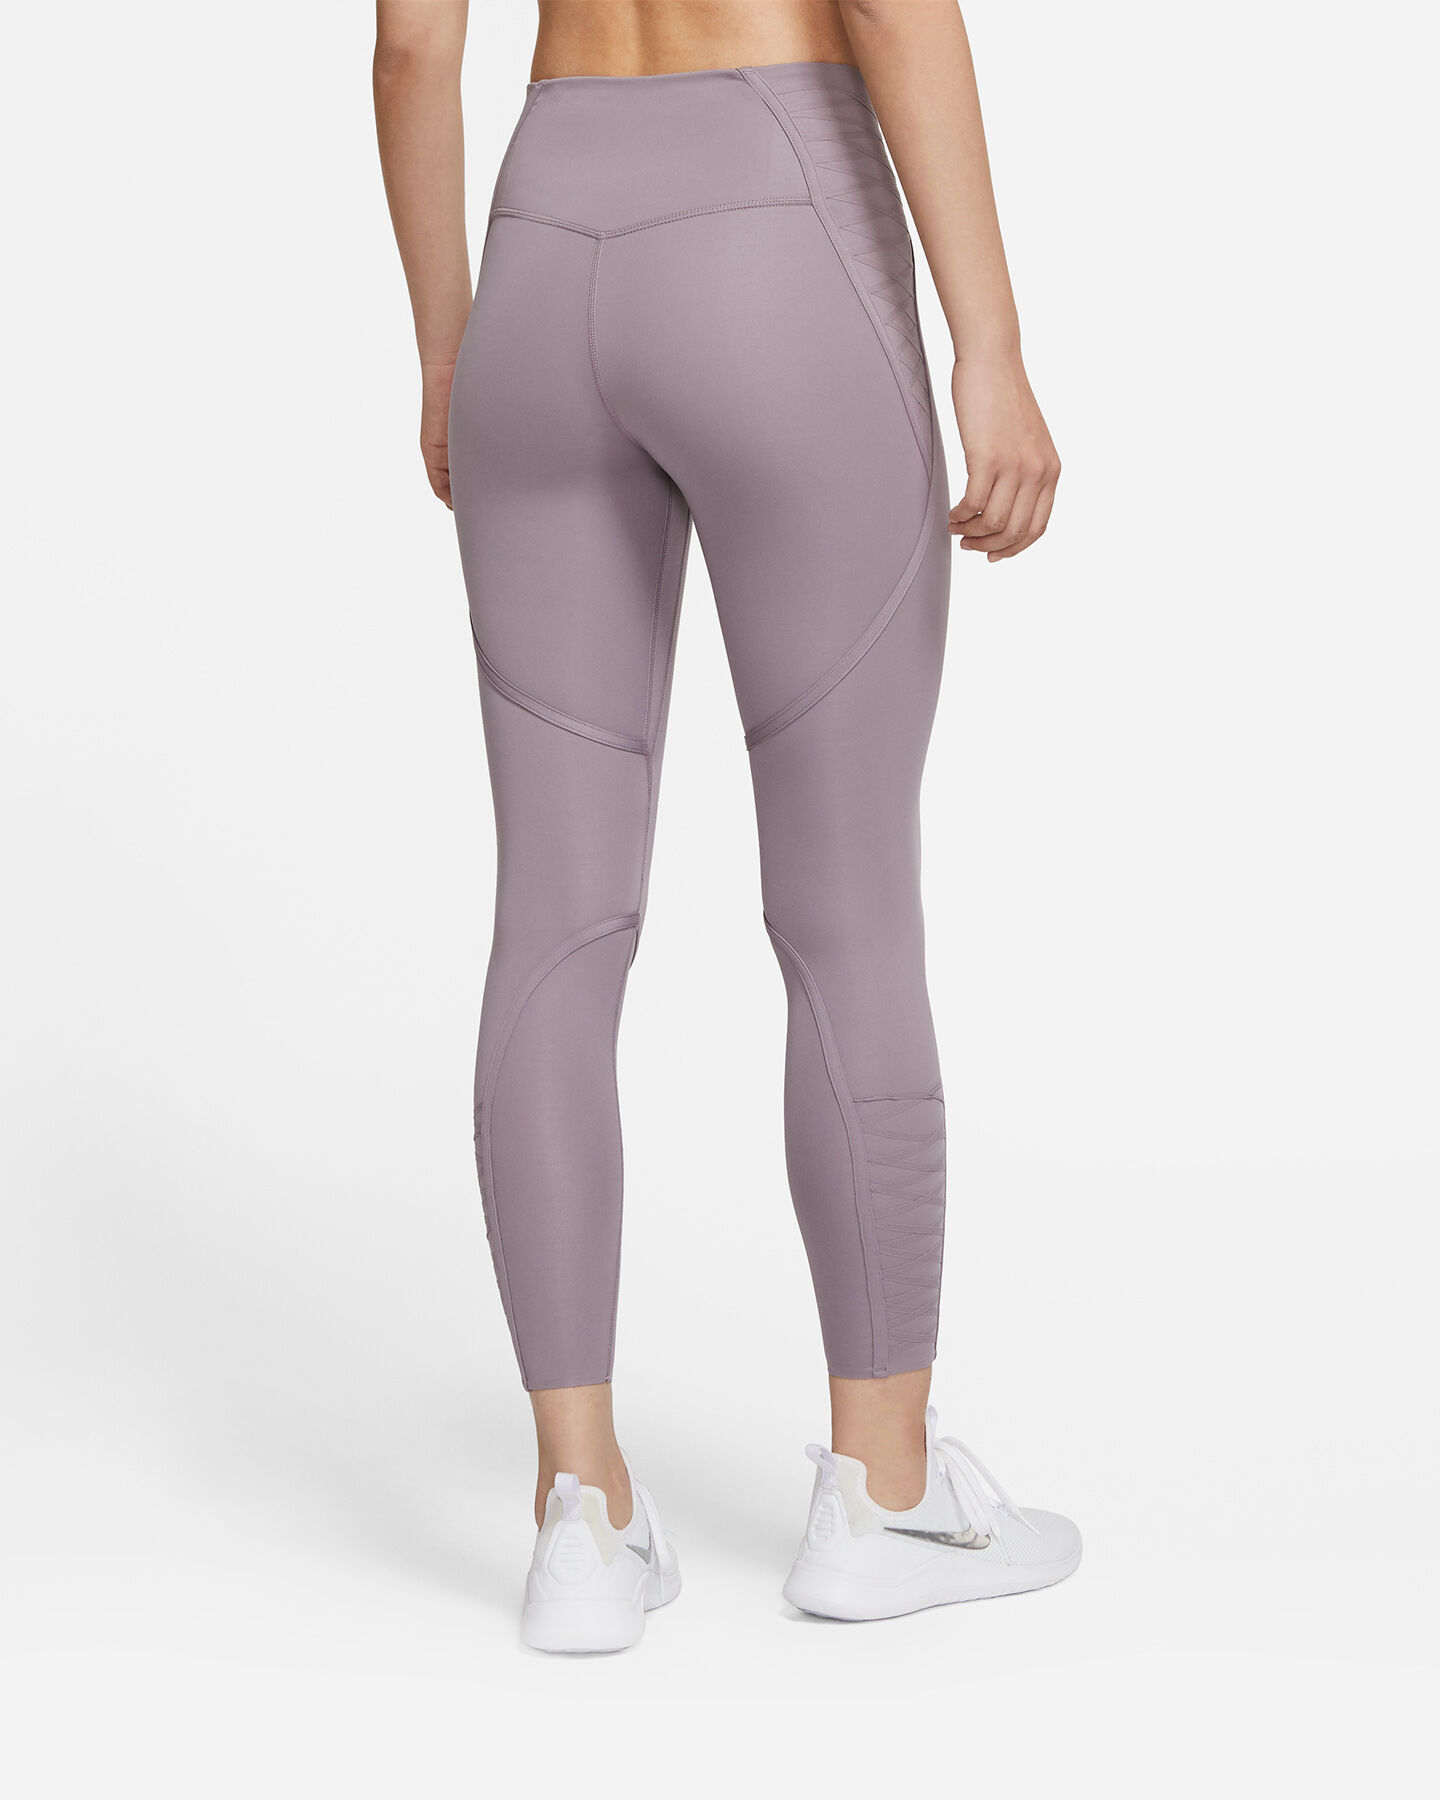  Leggings NIKE ONE LUX 7/8 W S5270517|531|XS scatto 1